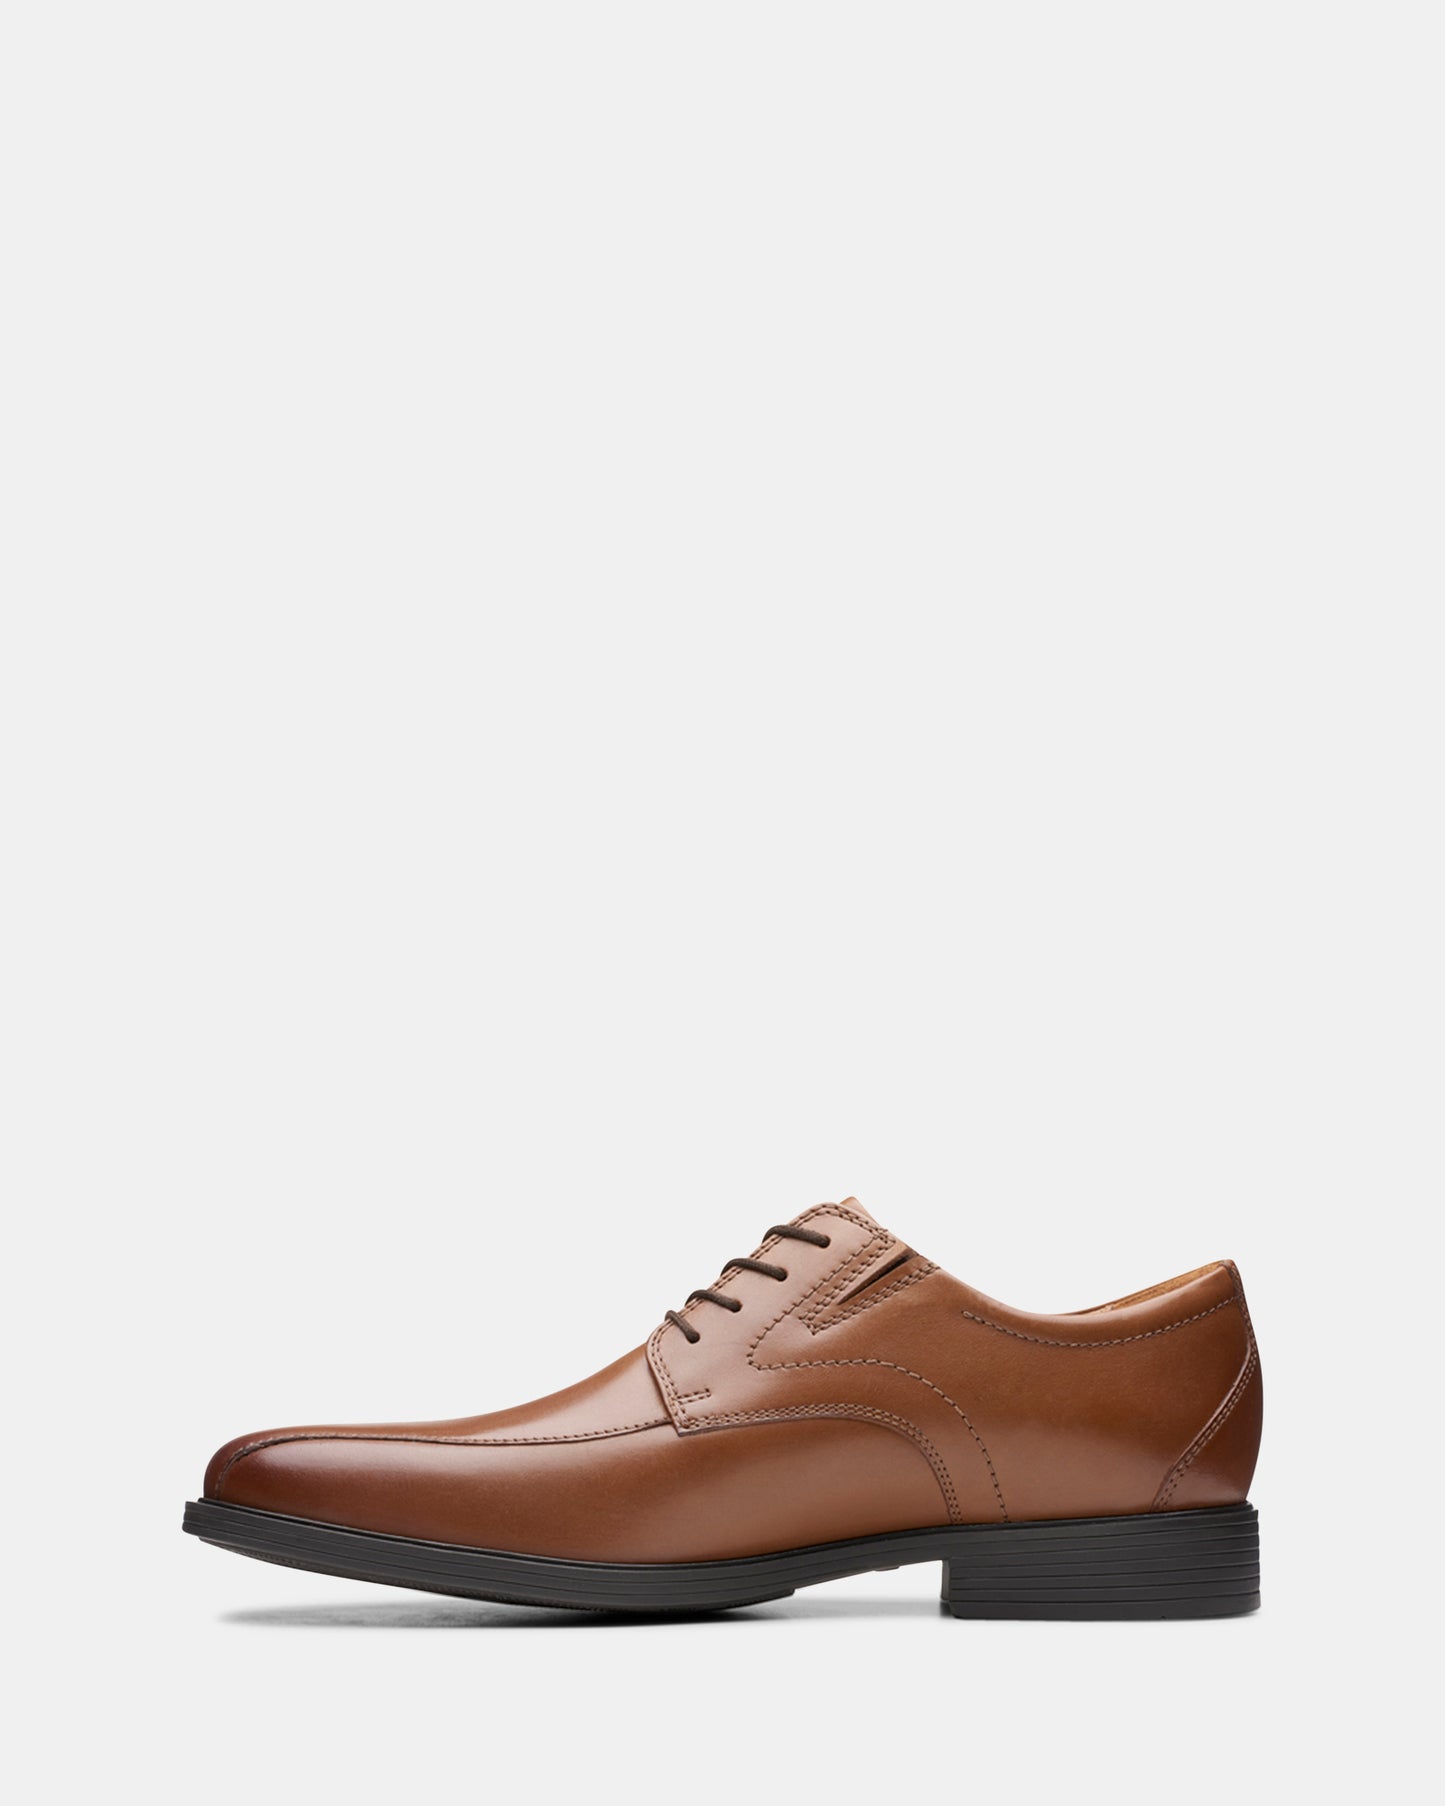 Whiddon Pace Dark Tan Leather